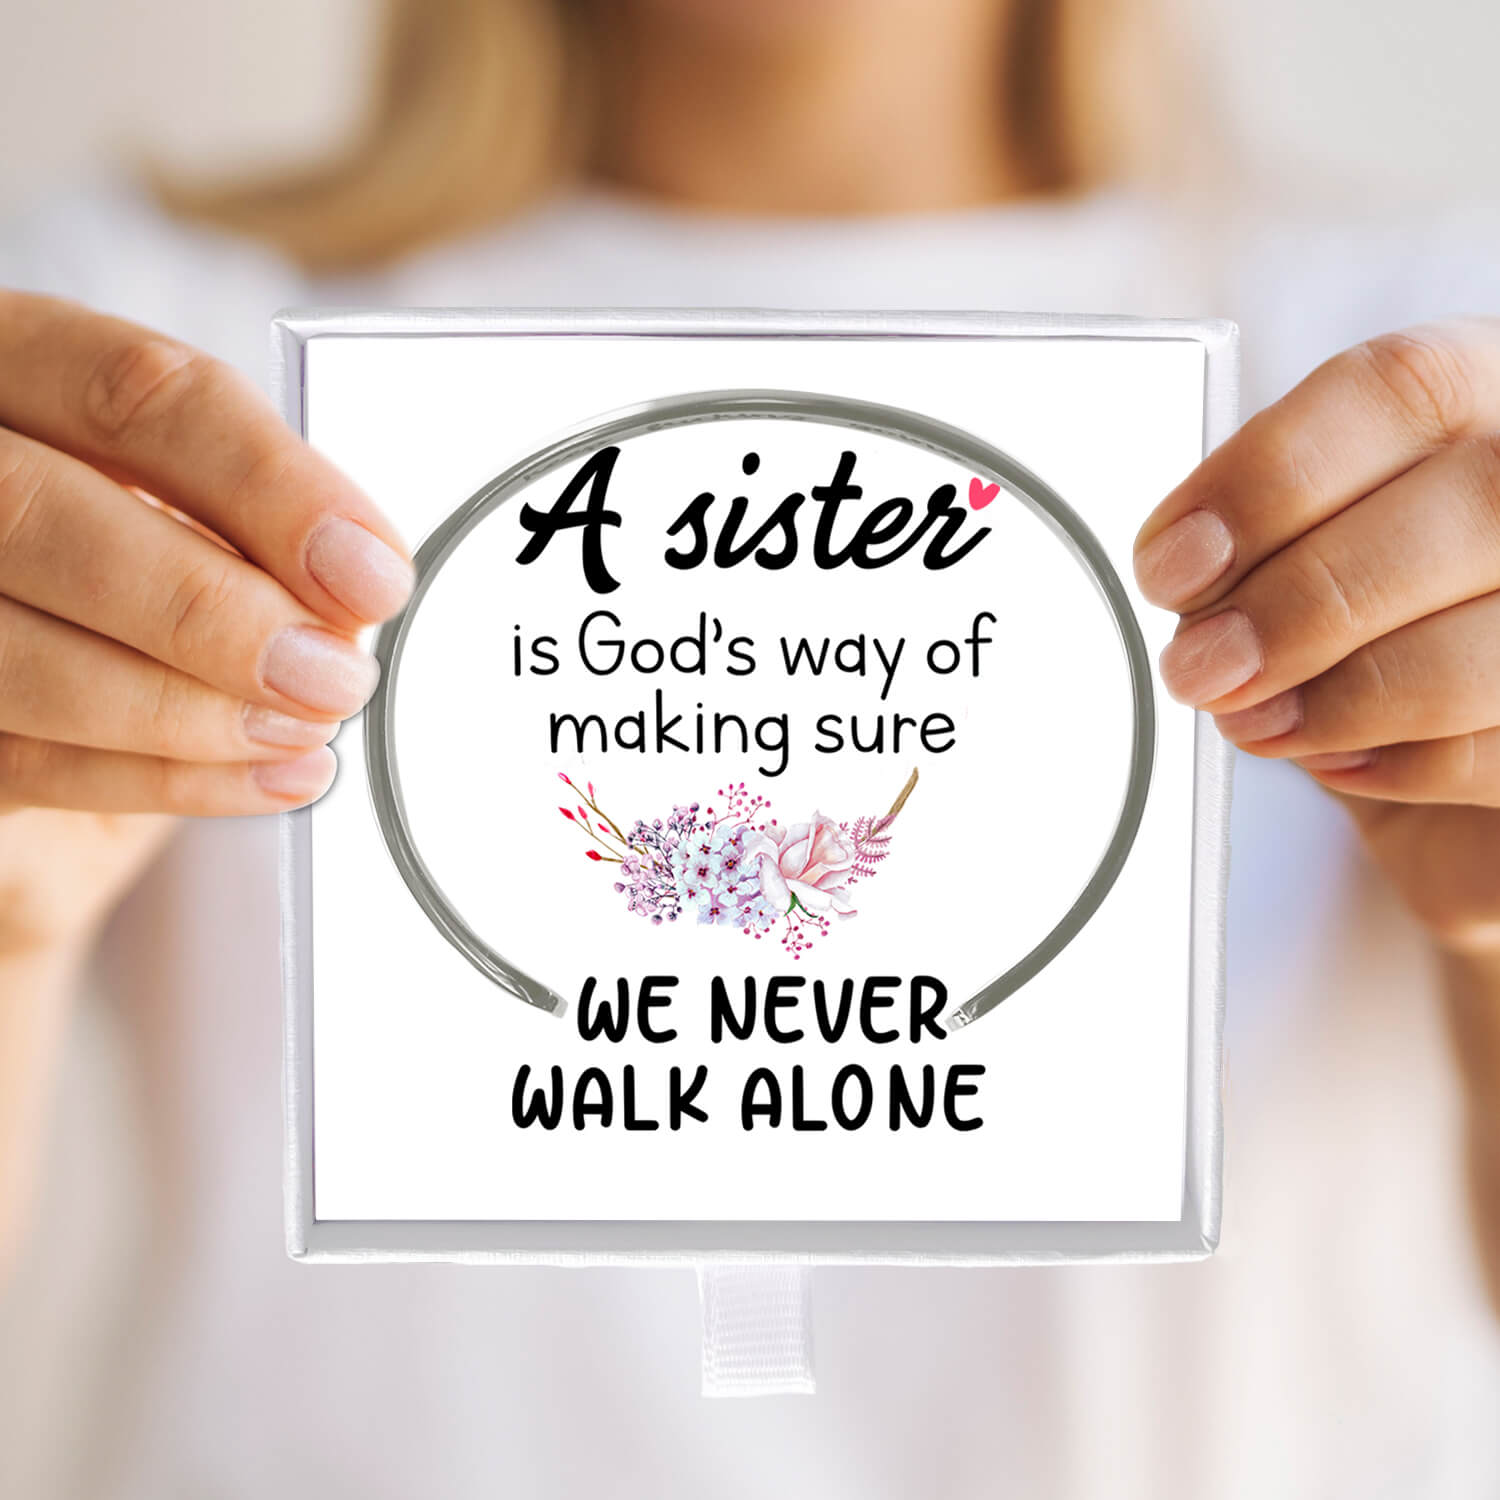 Personalized Sister Gifts, Sister Custom Photo Canvas, Birthday Present for  Sister, A Sister is God's Way of Making Sure We Never Walk Alone - Best